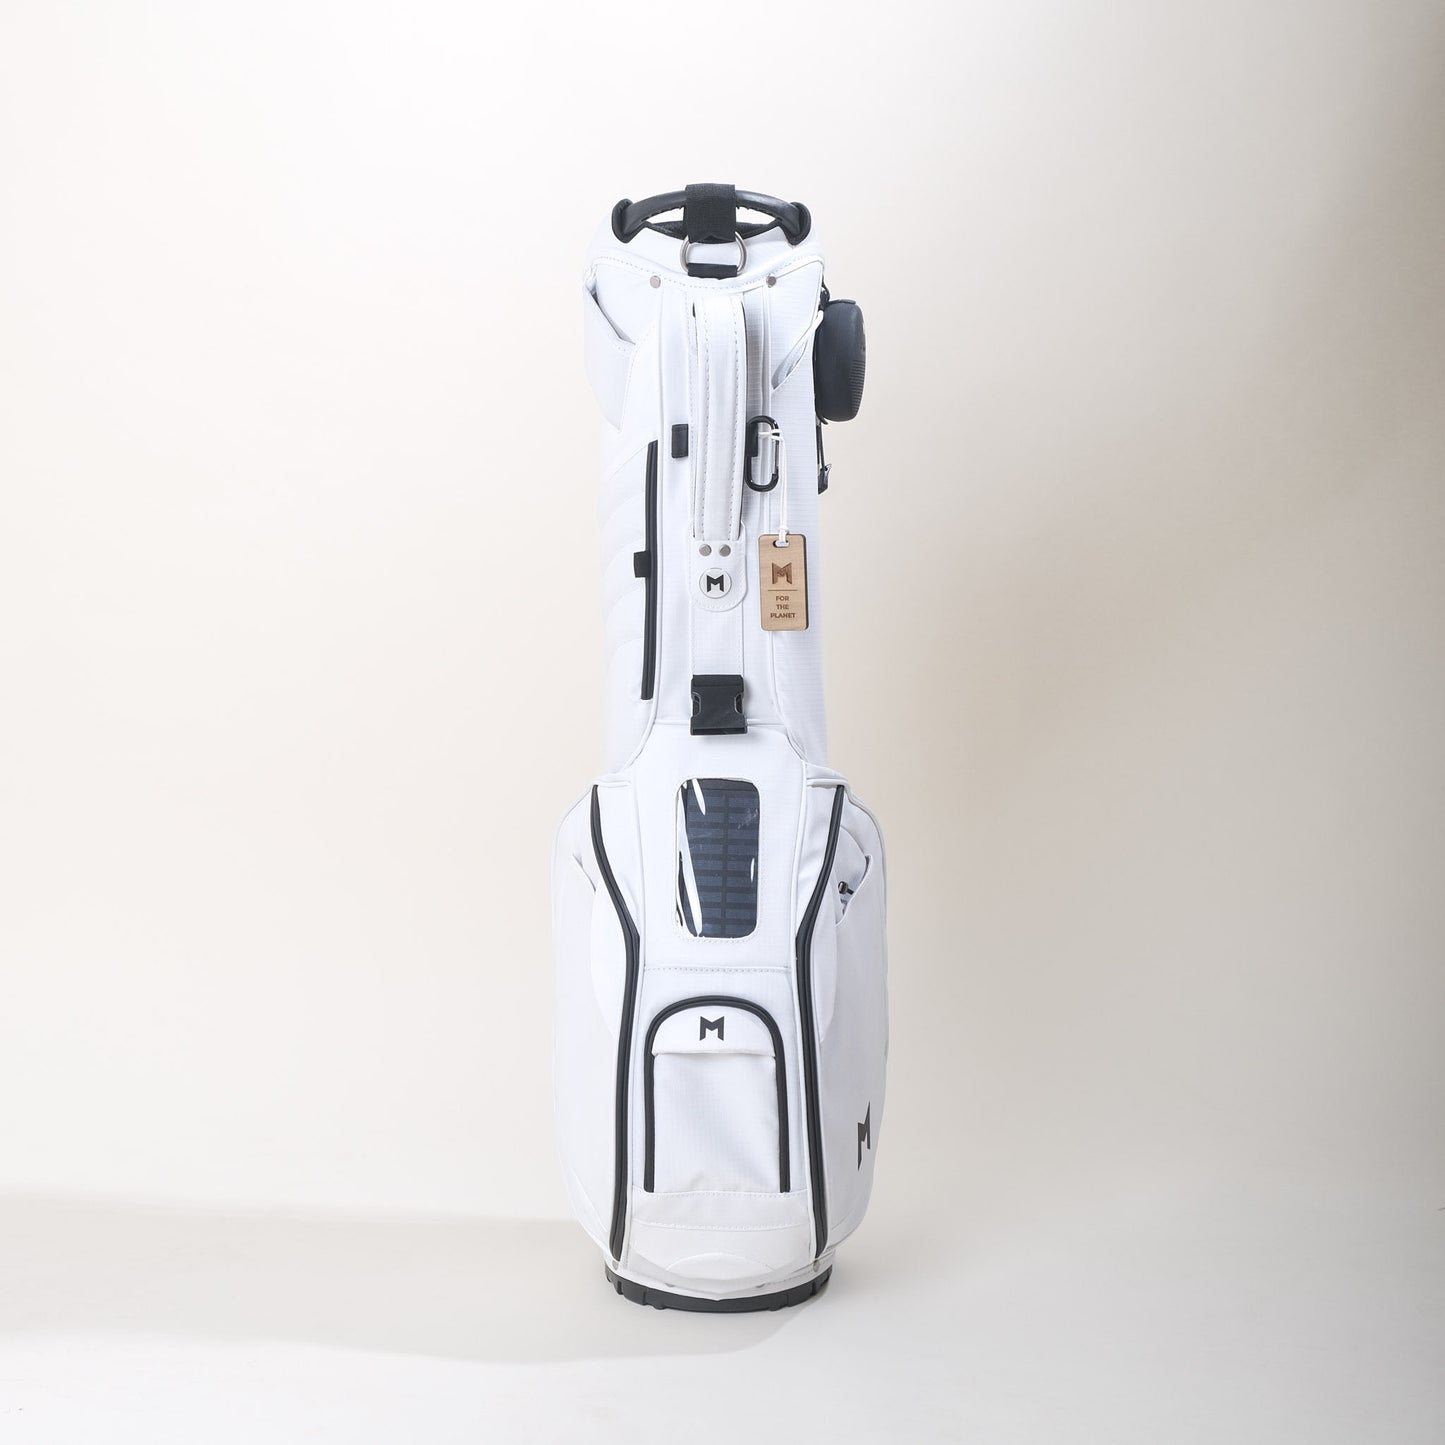 White 100% GRS Certified recycled material golf bag. MNML GOLF "M" logo on side pocket. All magnetic pockets, and cell phone pocket for filming, comes with a MNML GOLF ball marker. Free standing bag with legs and straps. Thermal Pocket (holds up to 5, 16oz bottles or 6 12oz cans), and 5-Way Divider (two full length). Add on's include a solar panel cell phone charger, for Android or IPhone; waterproof bluetooth speaker with 8hr battery life available for purchase. 